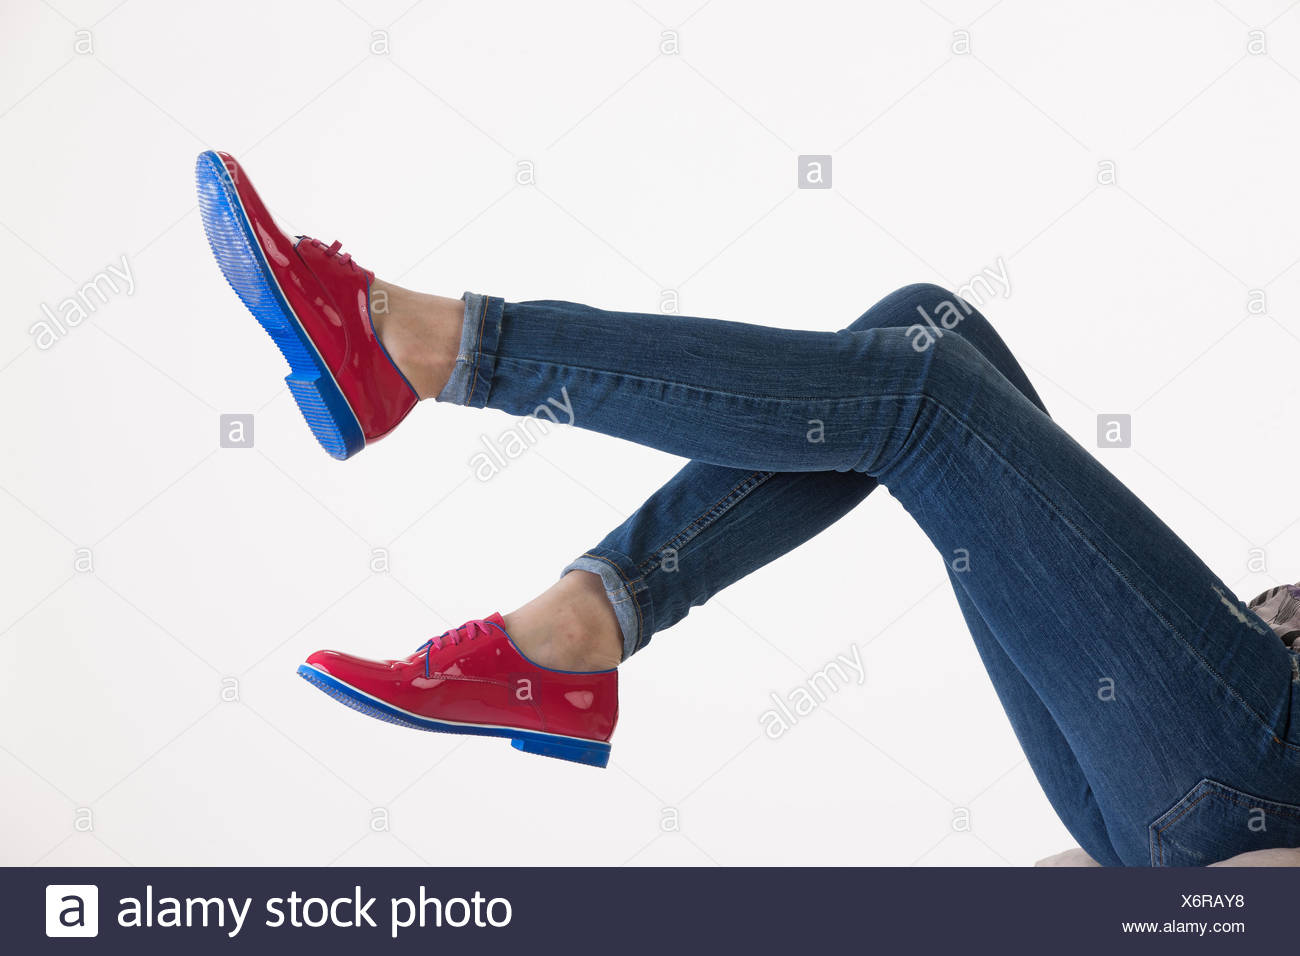 blue jeans with red shoes